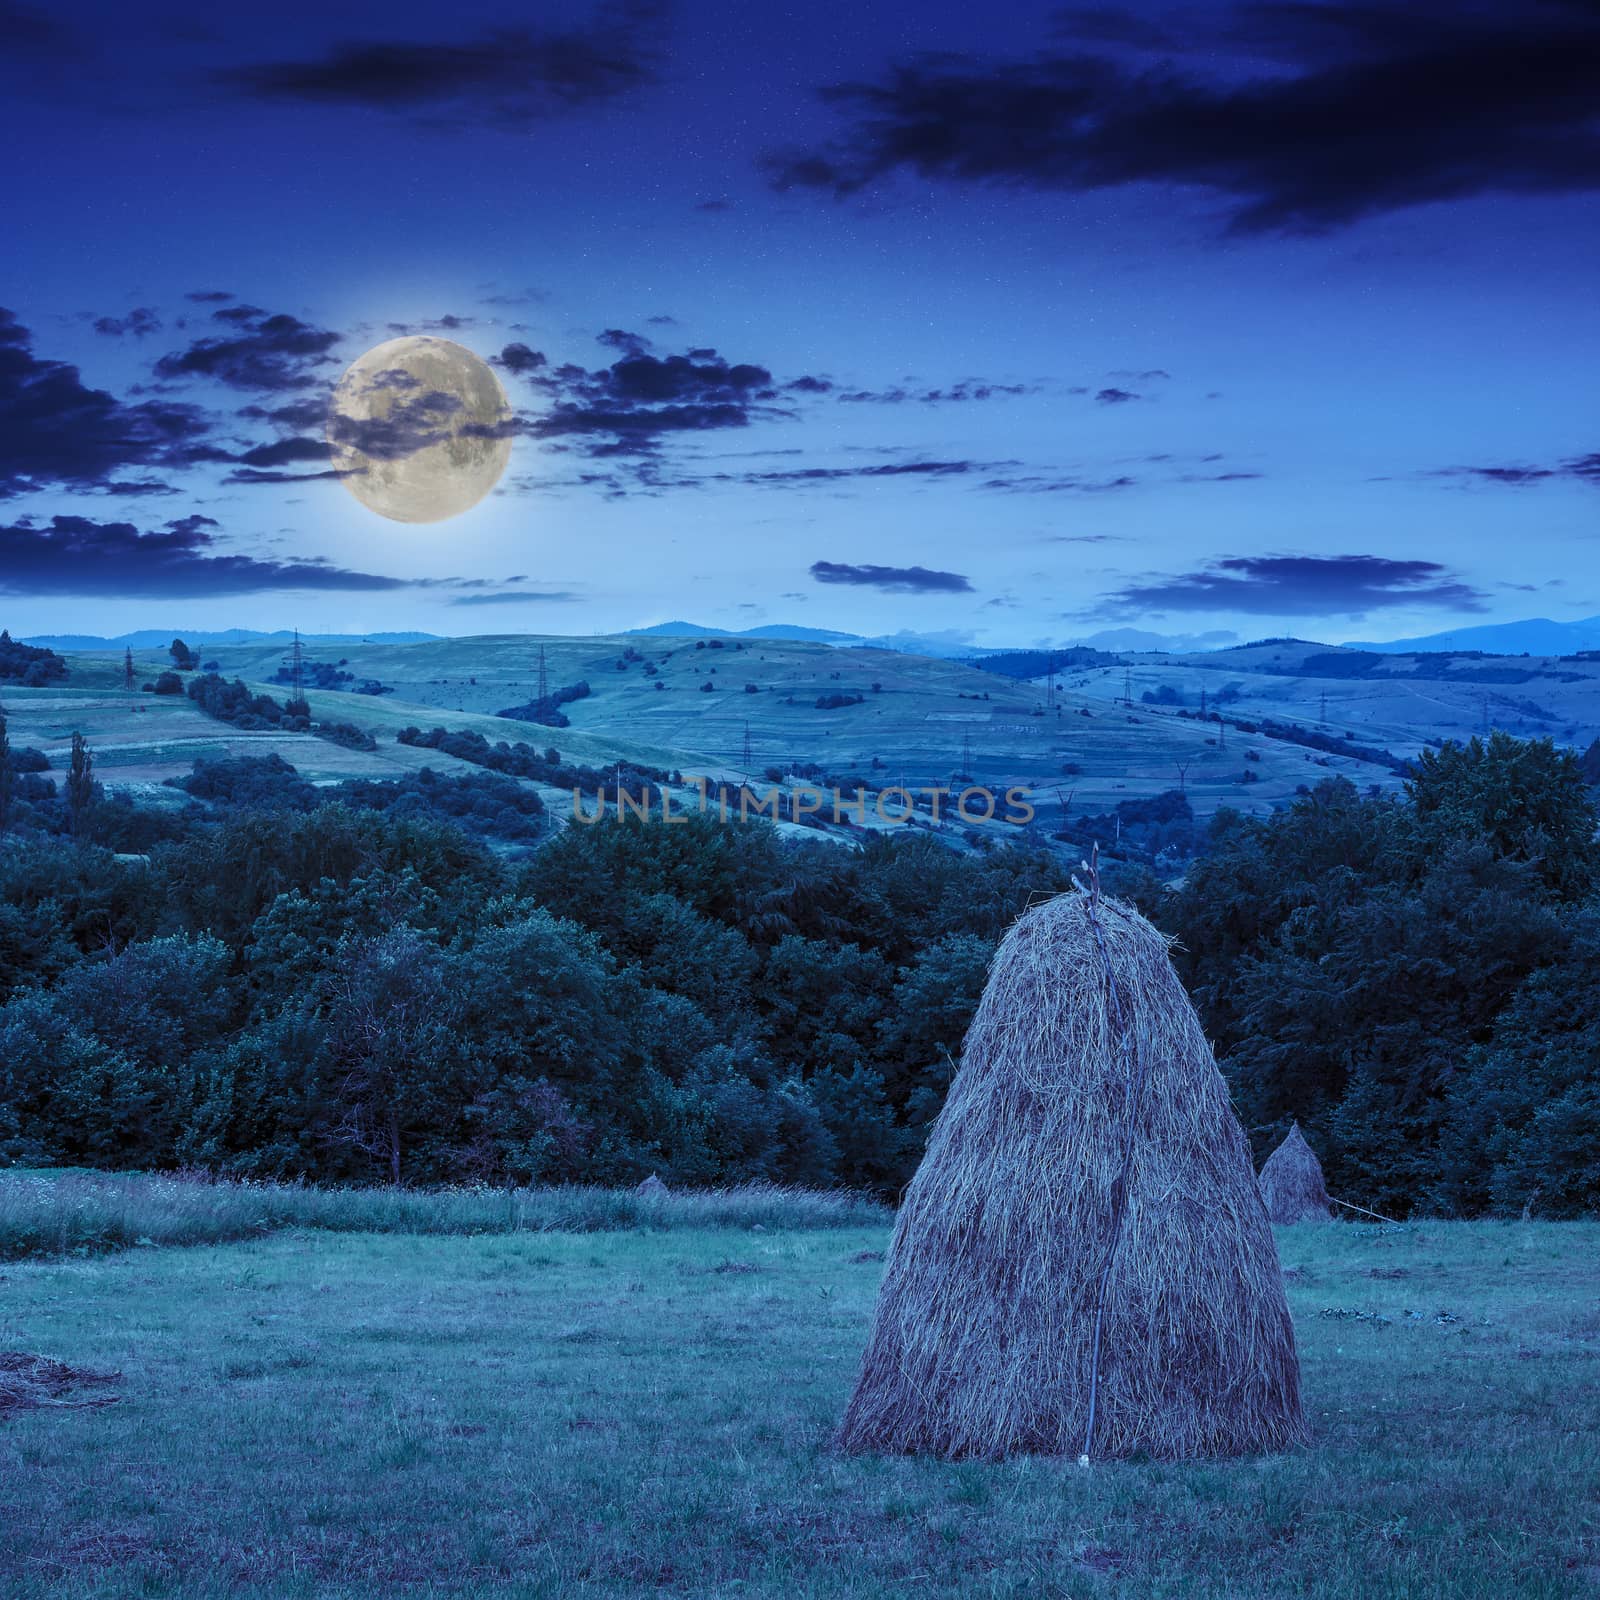 a pair of haystacks and a tree on a green meadow at the foot of the mountain at night in moonlight